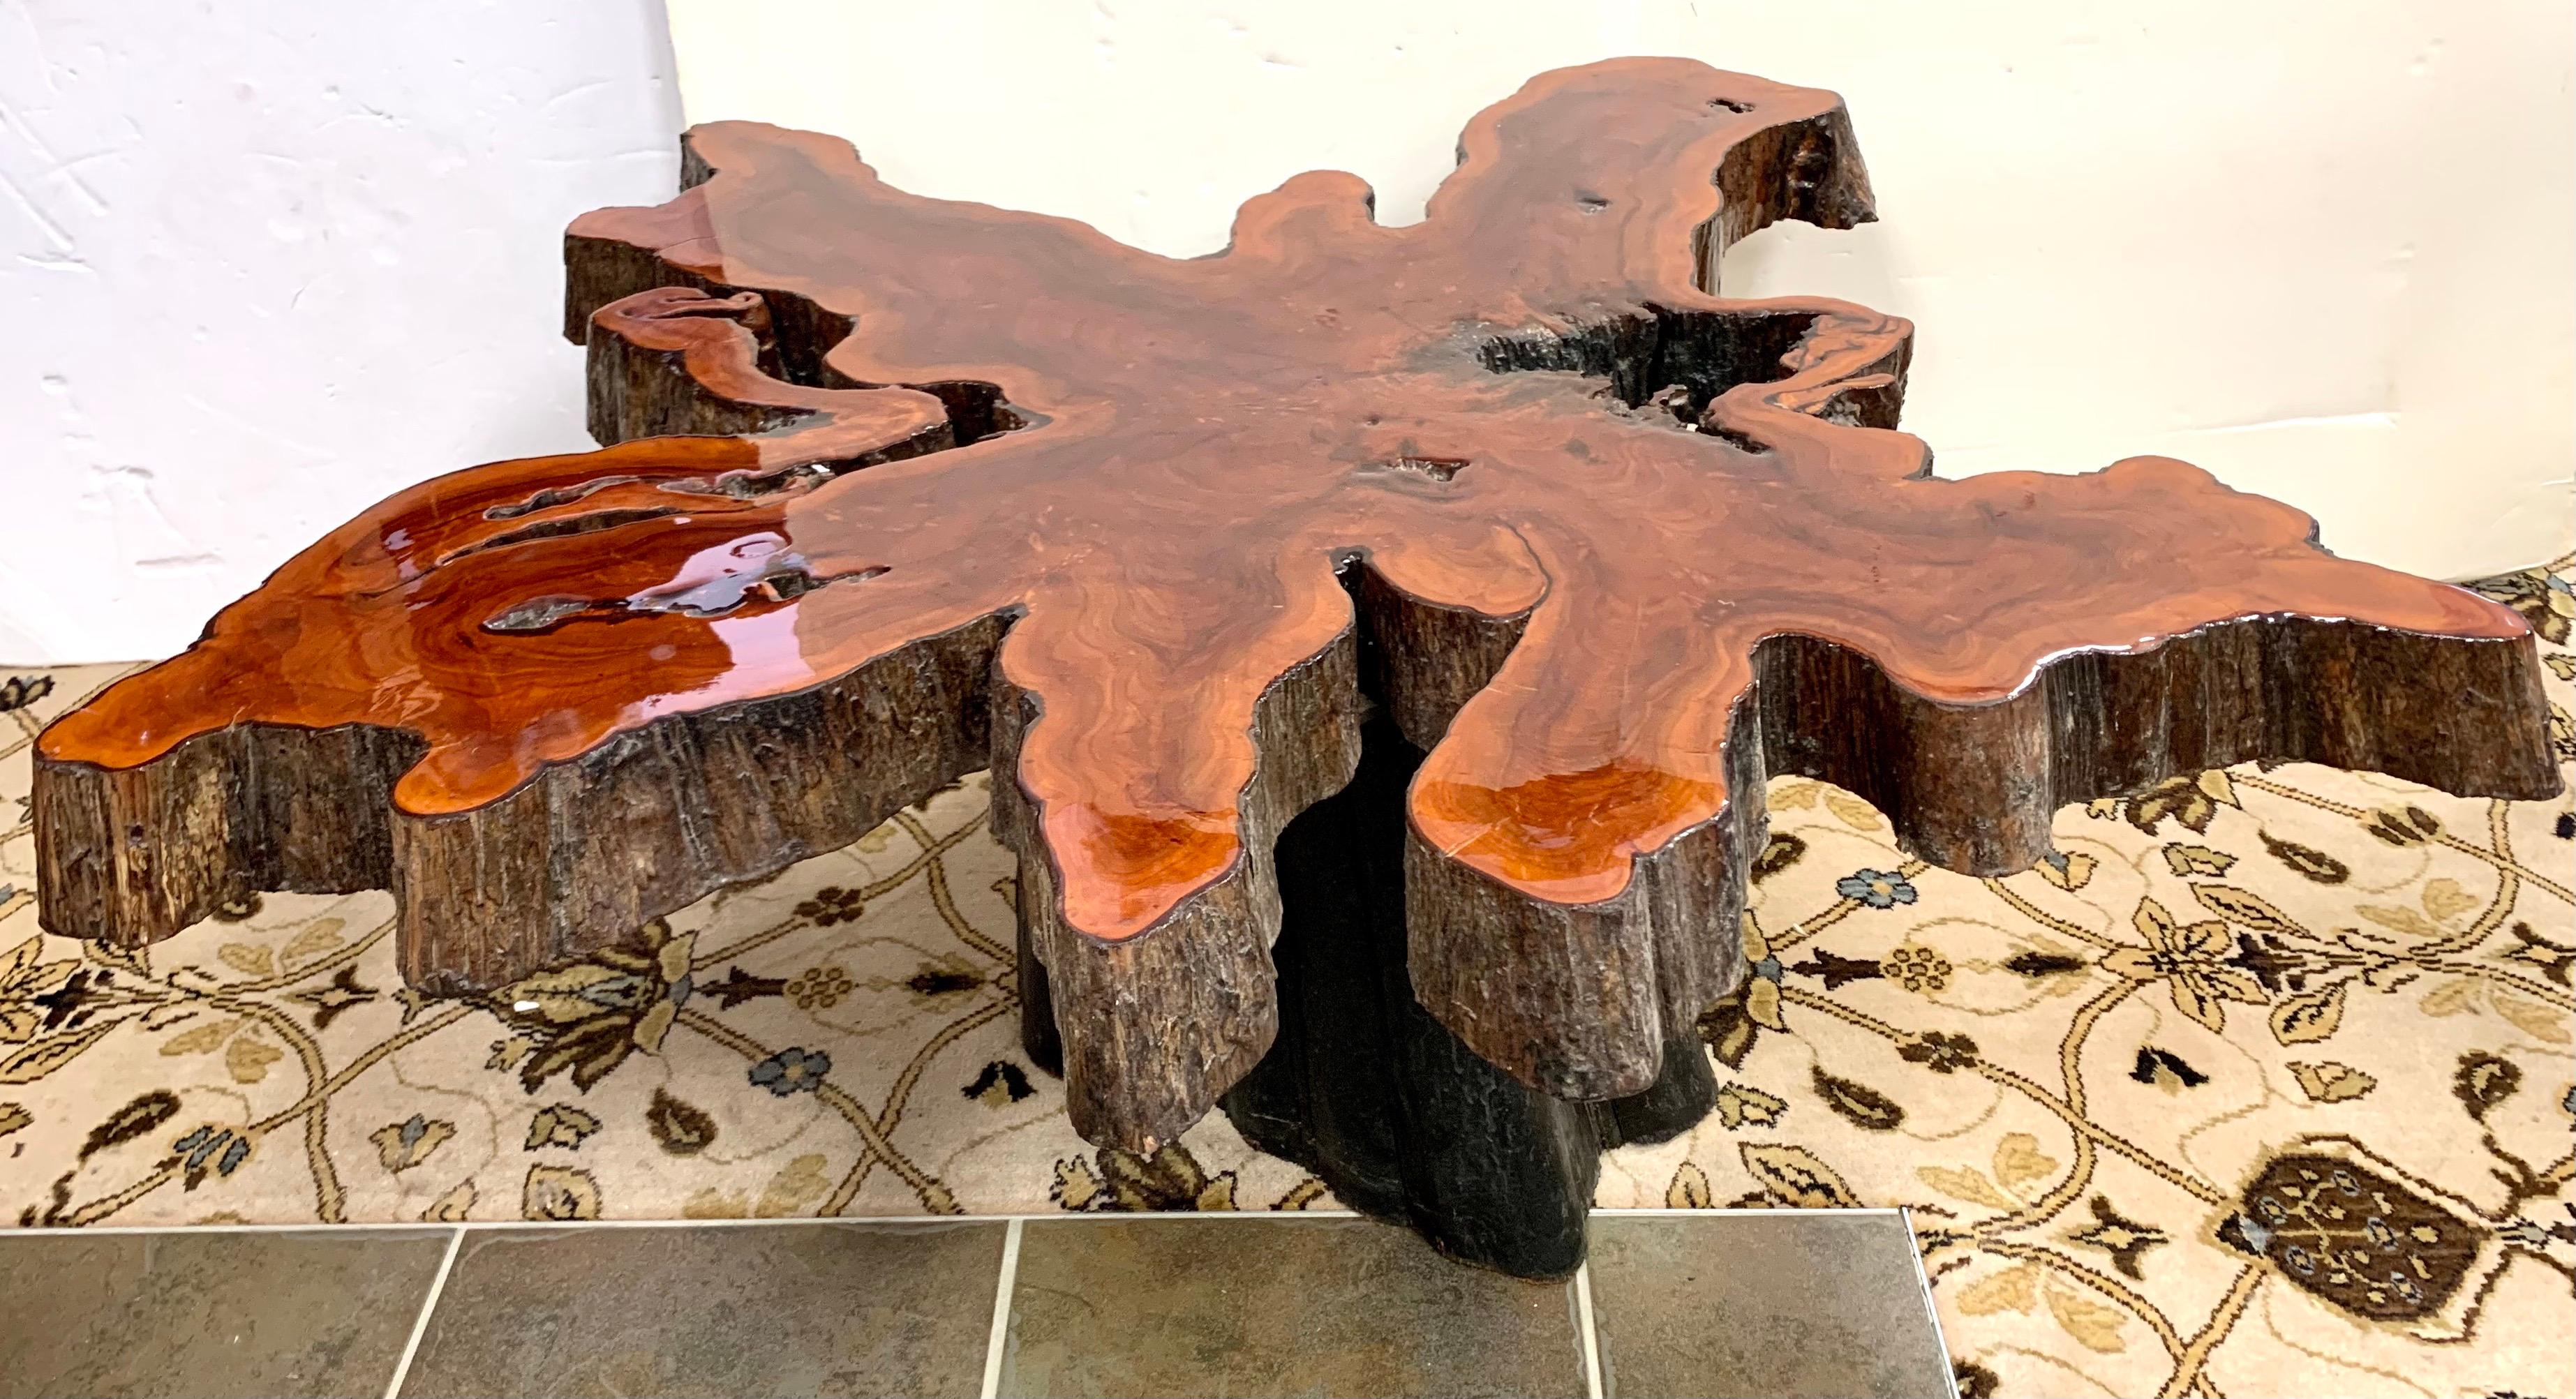 Vintage large mid century 1960’s organic live edge end table made of an impressive single slab of wood with a black tree trunk base. Great scale at 41 x 44 x 18.5 tall and better lines.